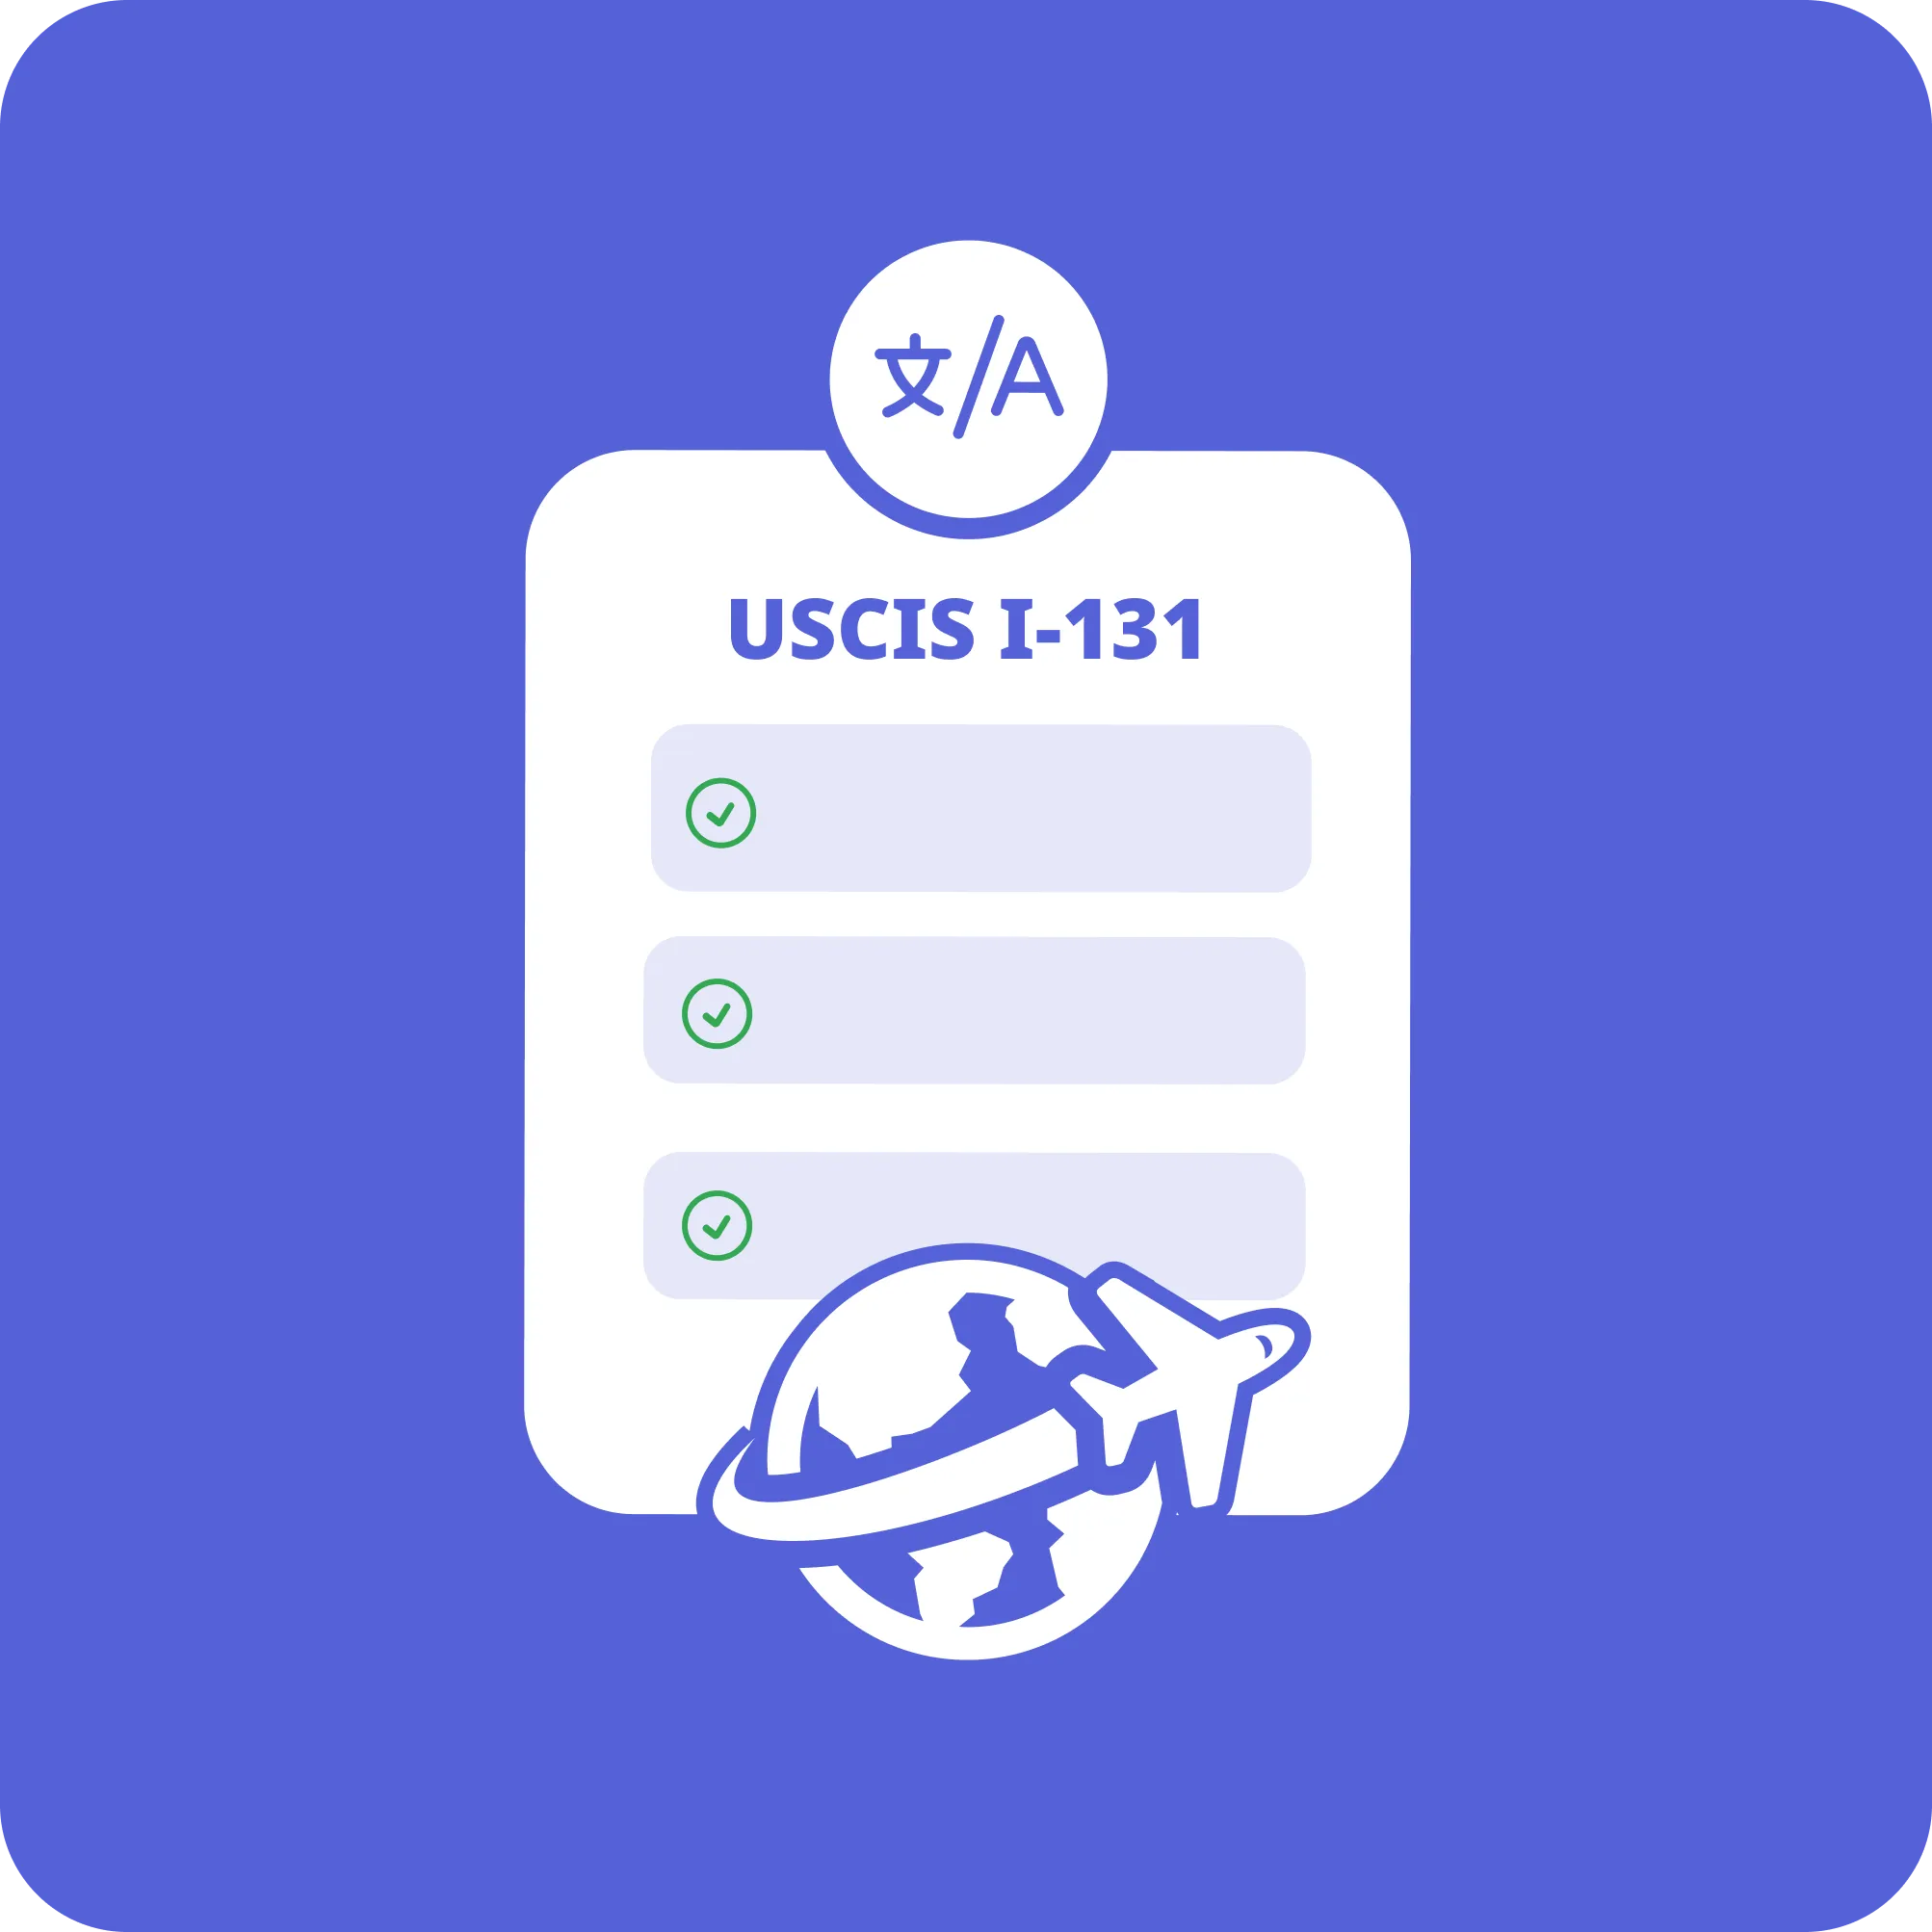 USCIS Form I-131 | Everything You Need To Know - MotaWord